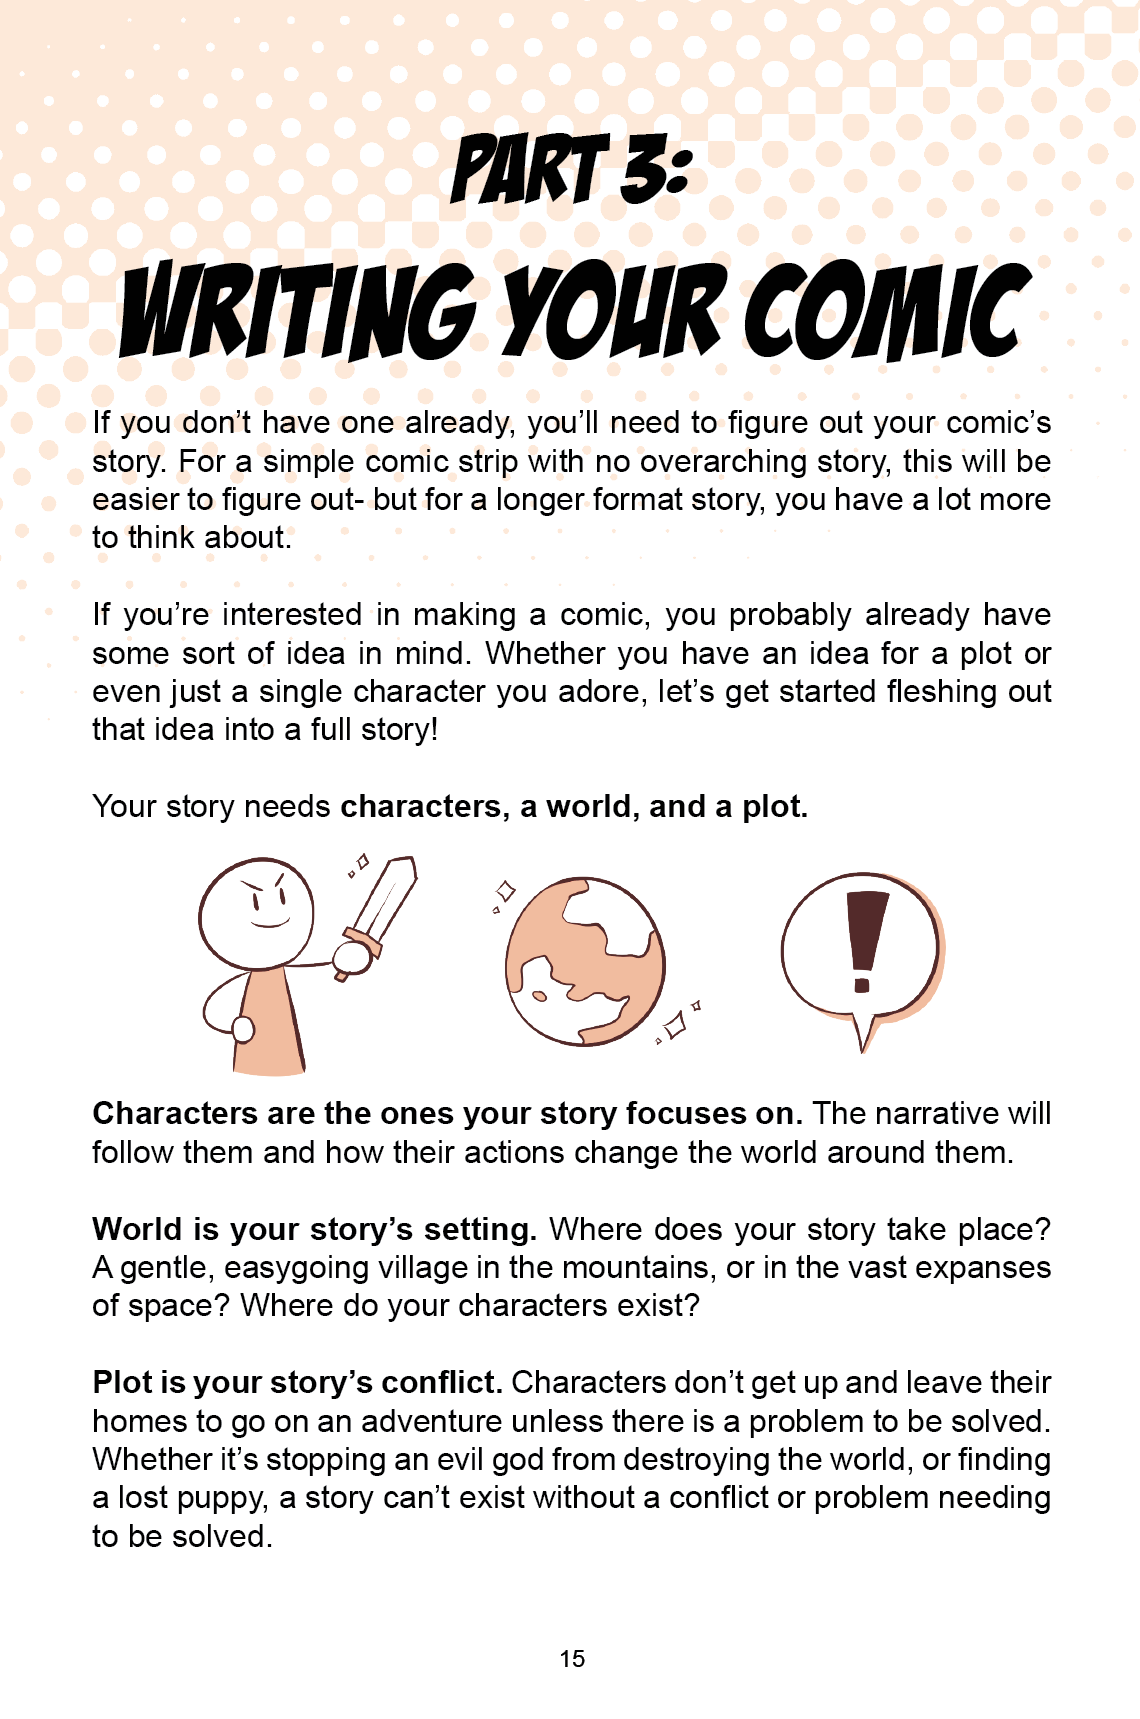 How to Webcomic: The Ultimate Guide to Making Online Comics [Ebook + Physical(PREORDER)] - TheStarfishface